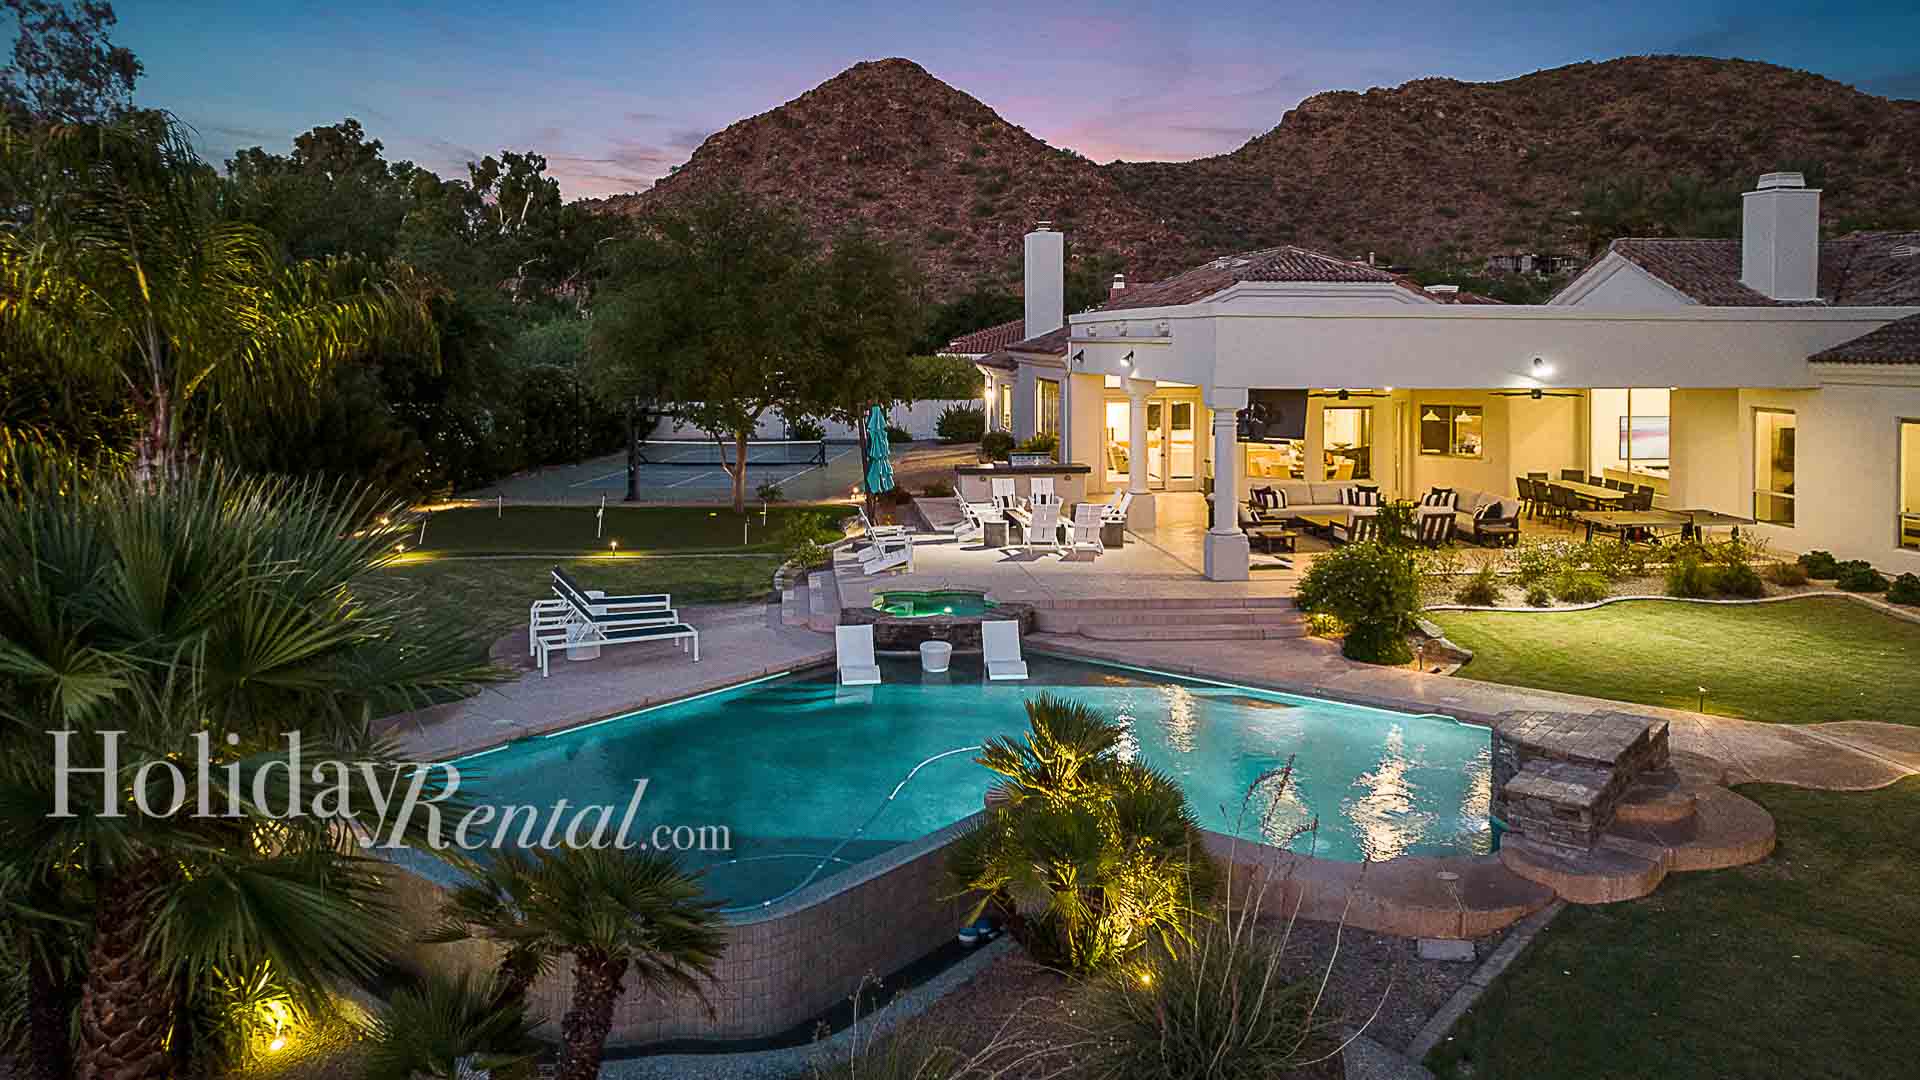 Backyard with tons of games and entertainment for everyone at sundown with mountain views.